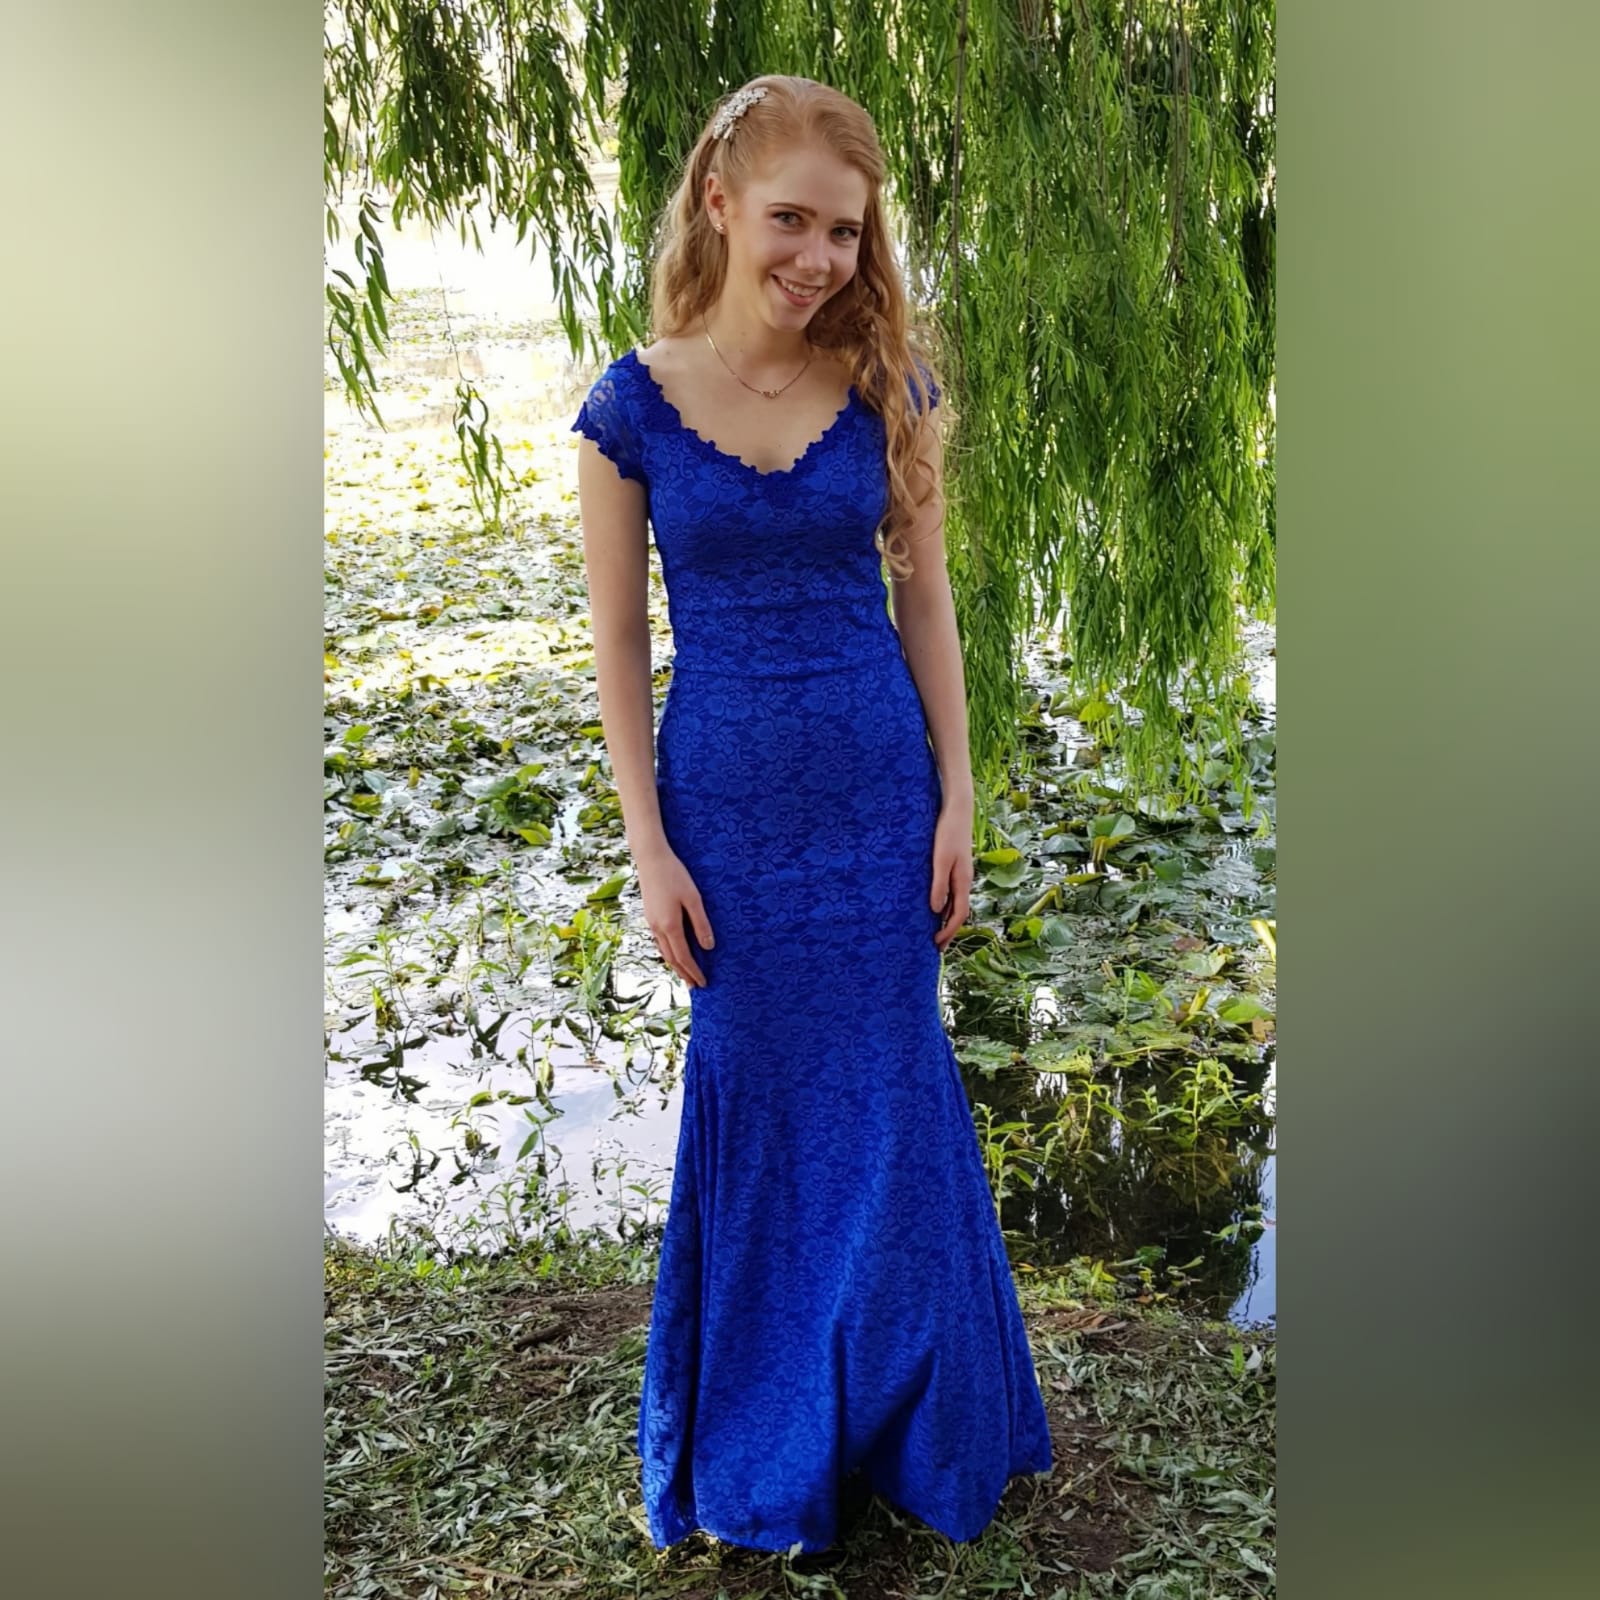 Royal blue fully lace prom dress 4 royal blue fully lace prom dress. An elegant simple design fitted till the hip with a slight flare. An off-shoulder neckline and cap sleeves detailed with guipure lace.